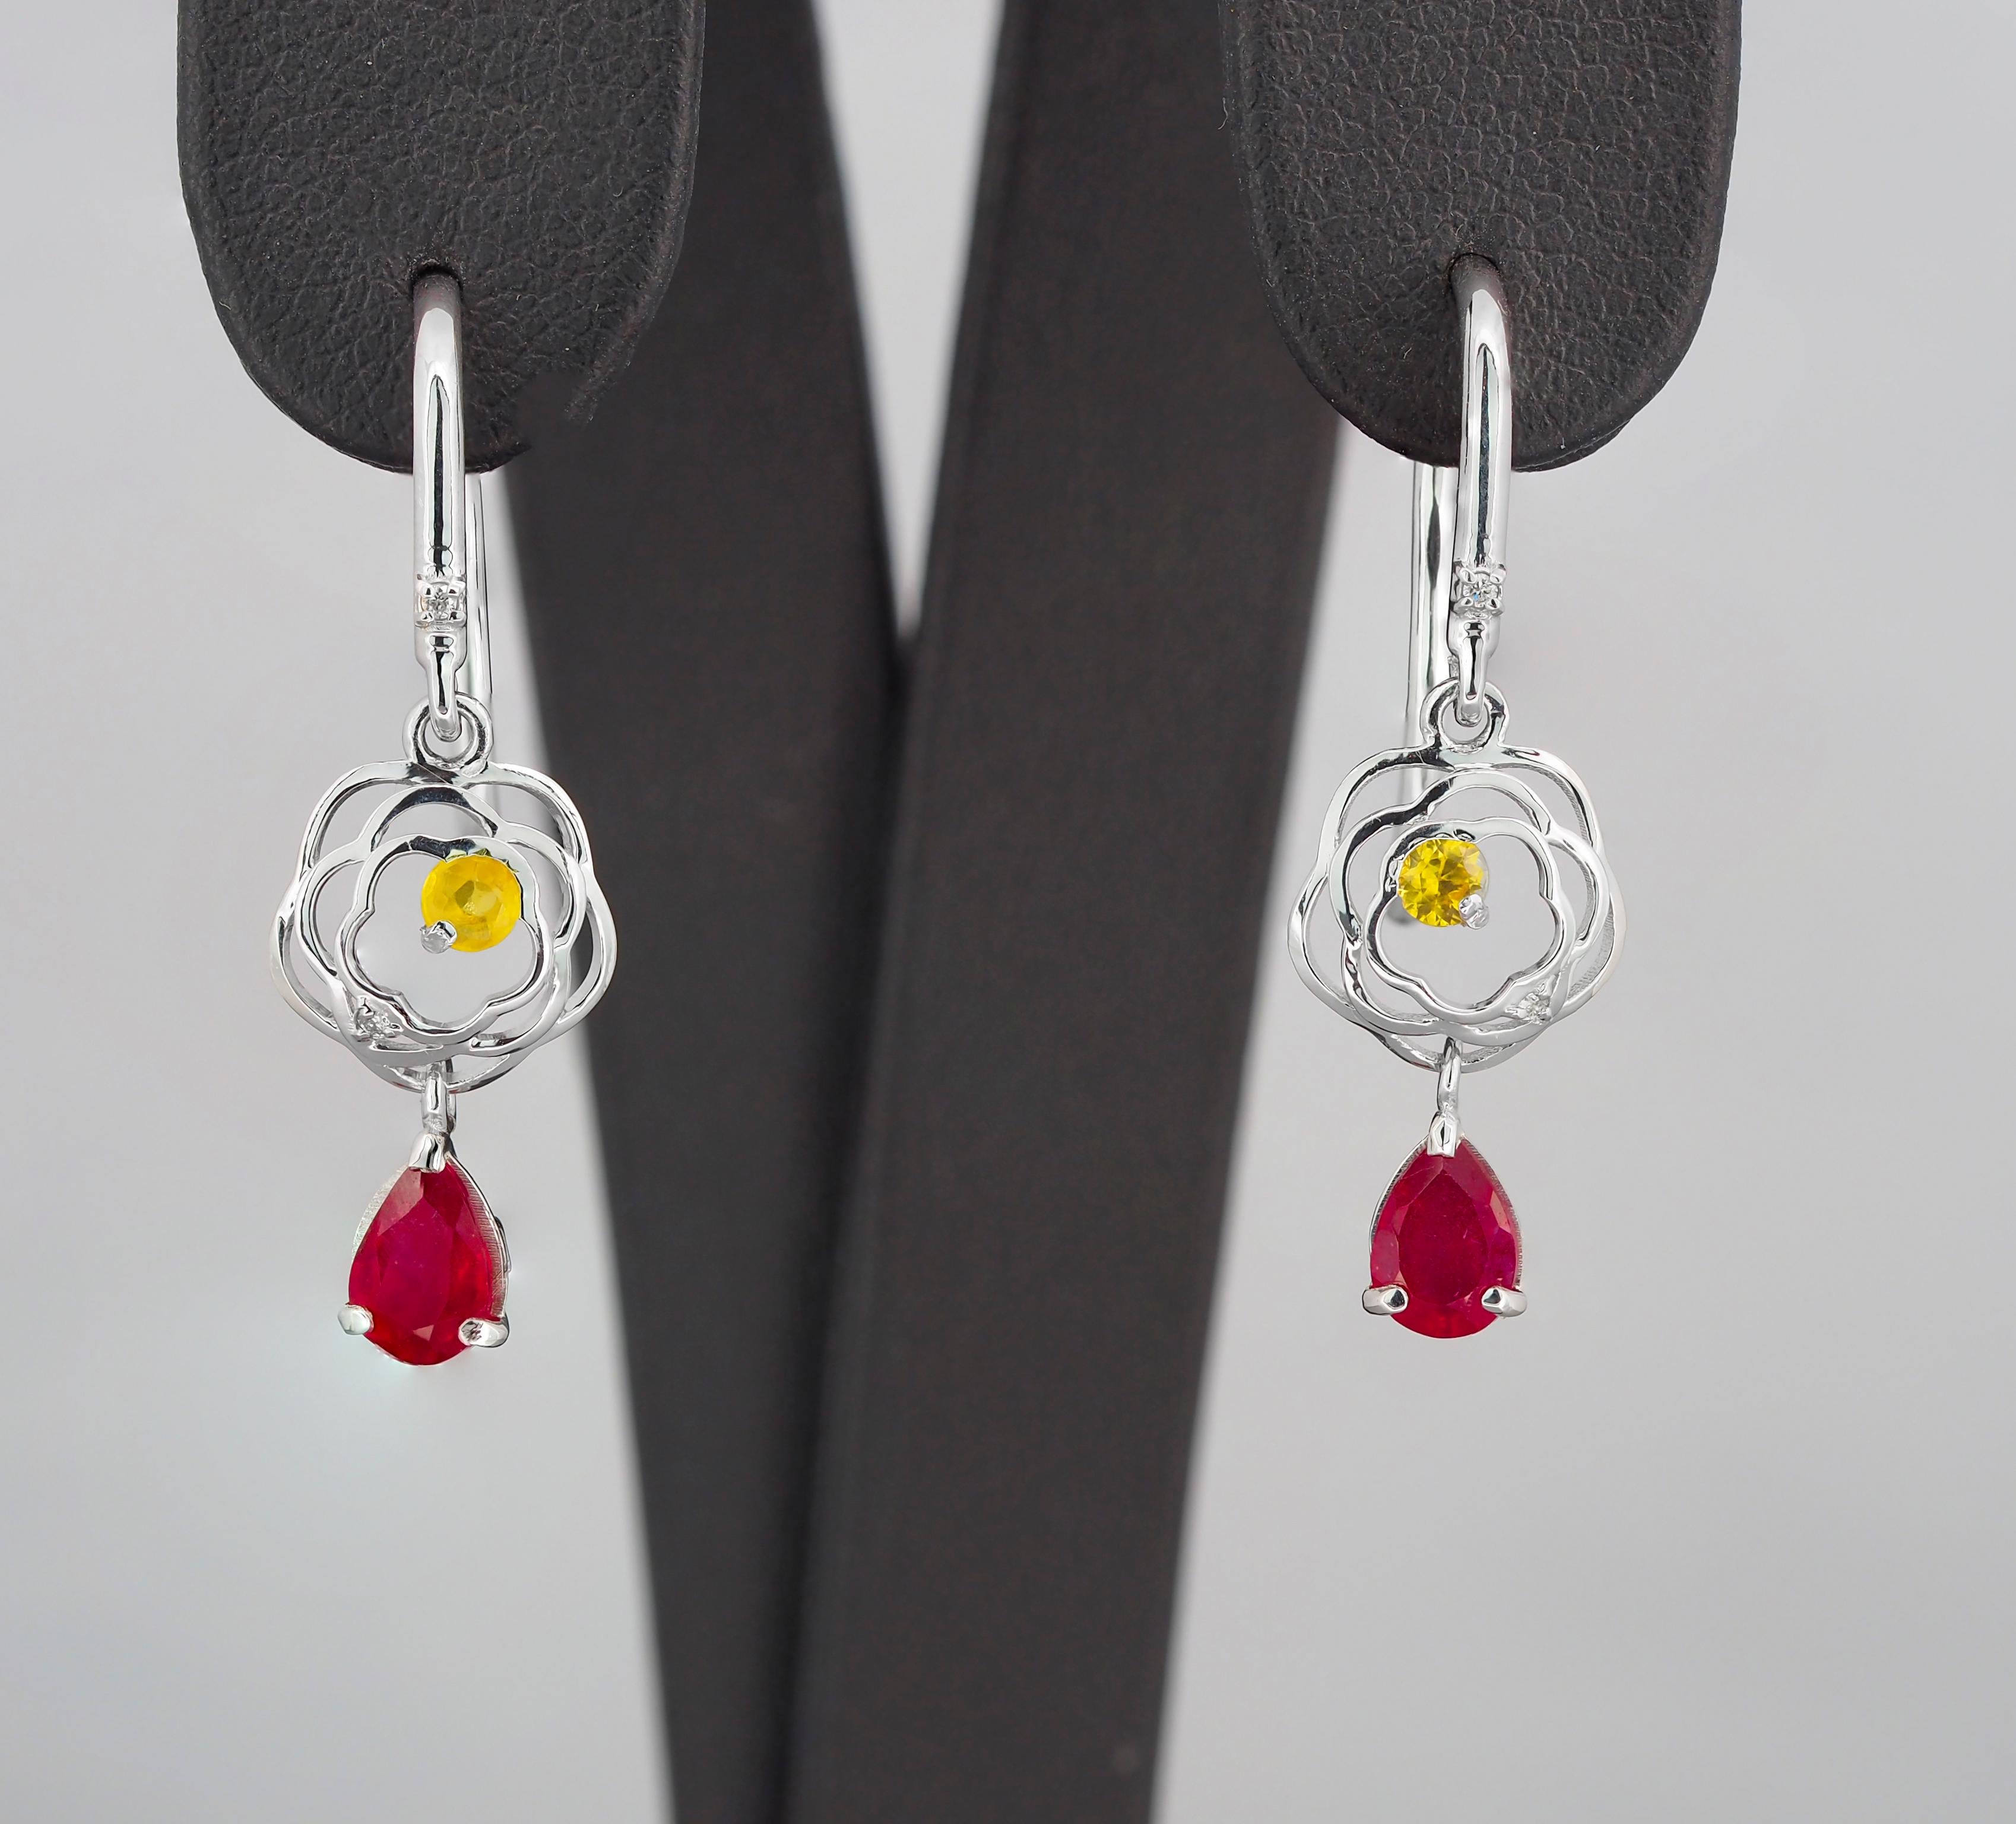 Pear ruby drop earrings in 14k gold. 
Natural ruby earrings. Real ruby earrings. July birthstone ruby earrings.

Material: 14k gold.
Weight: 2 gr.
Size Earrings: 31.5x8.9 mm.

Central stones: Natural Rubies - 2 pieces 
Cut: Pear
Weight: aprx 1.2 ct.